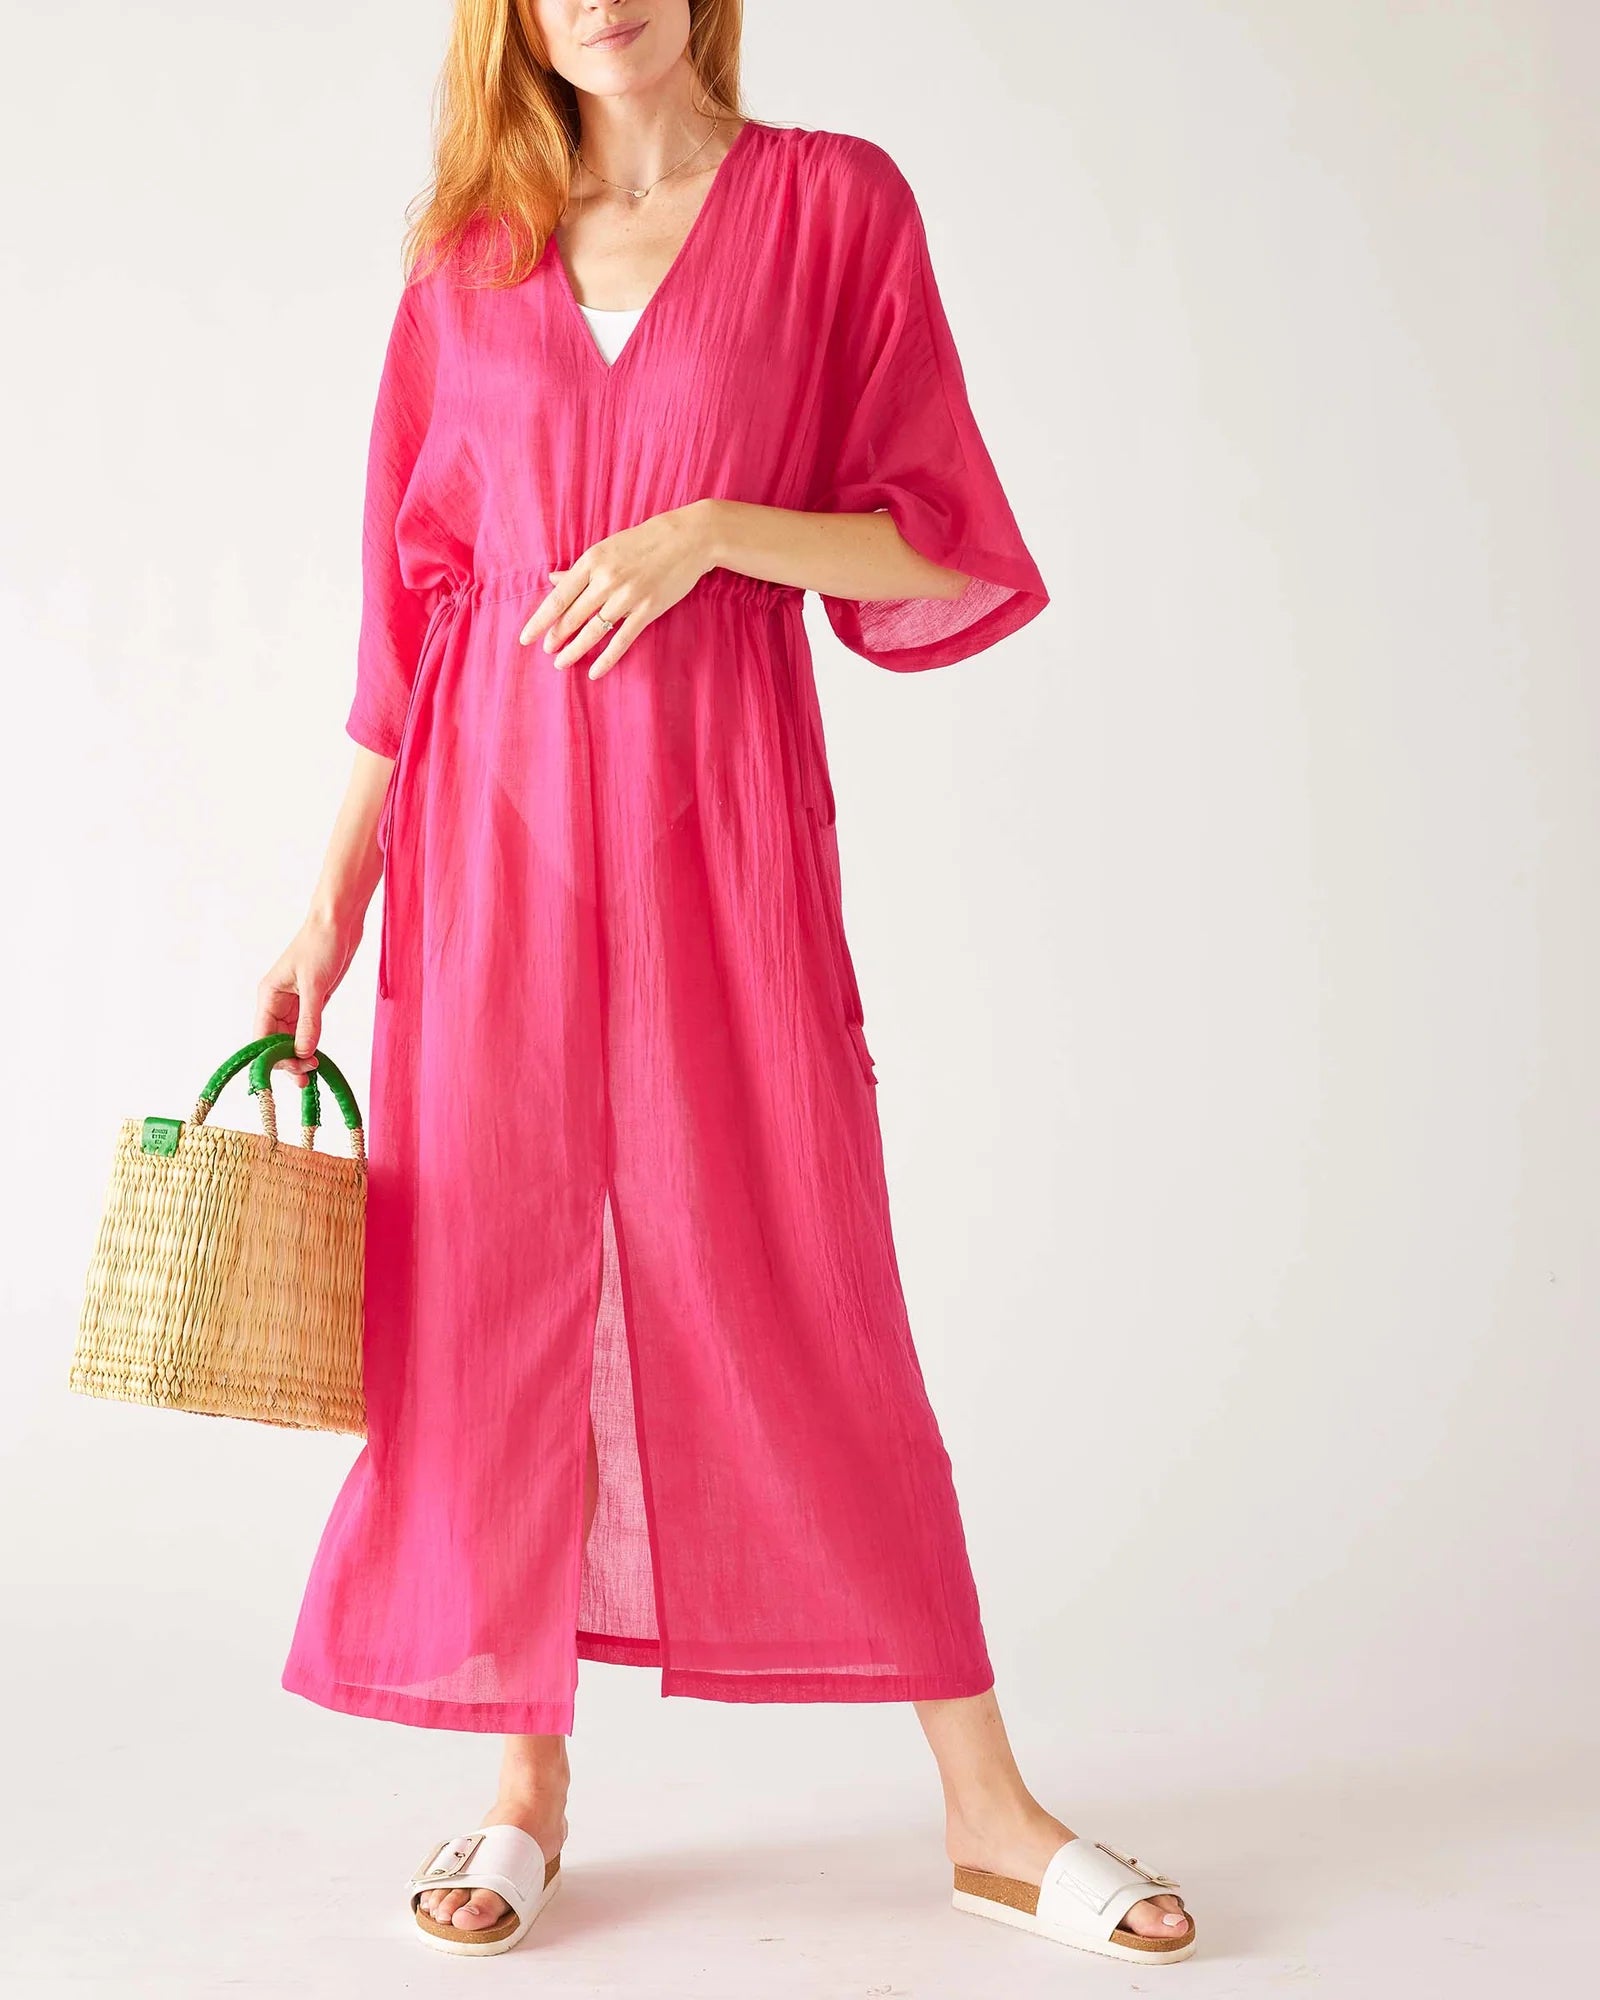 Breezy and Beautiful Daisy Hand Block Cotton Kaftan is the perfect